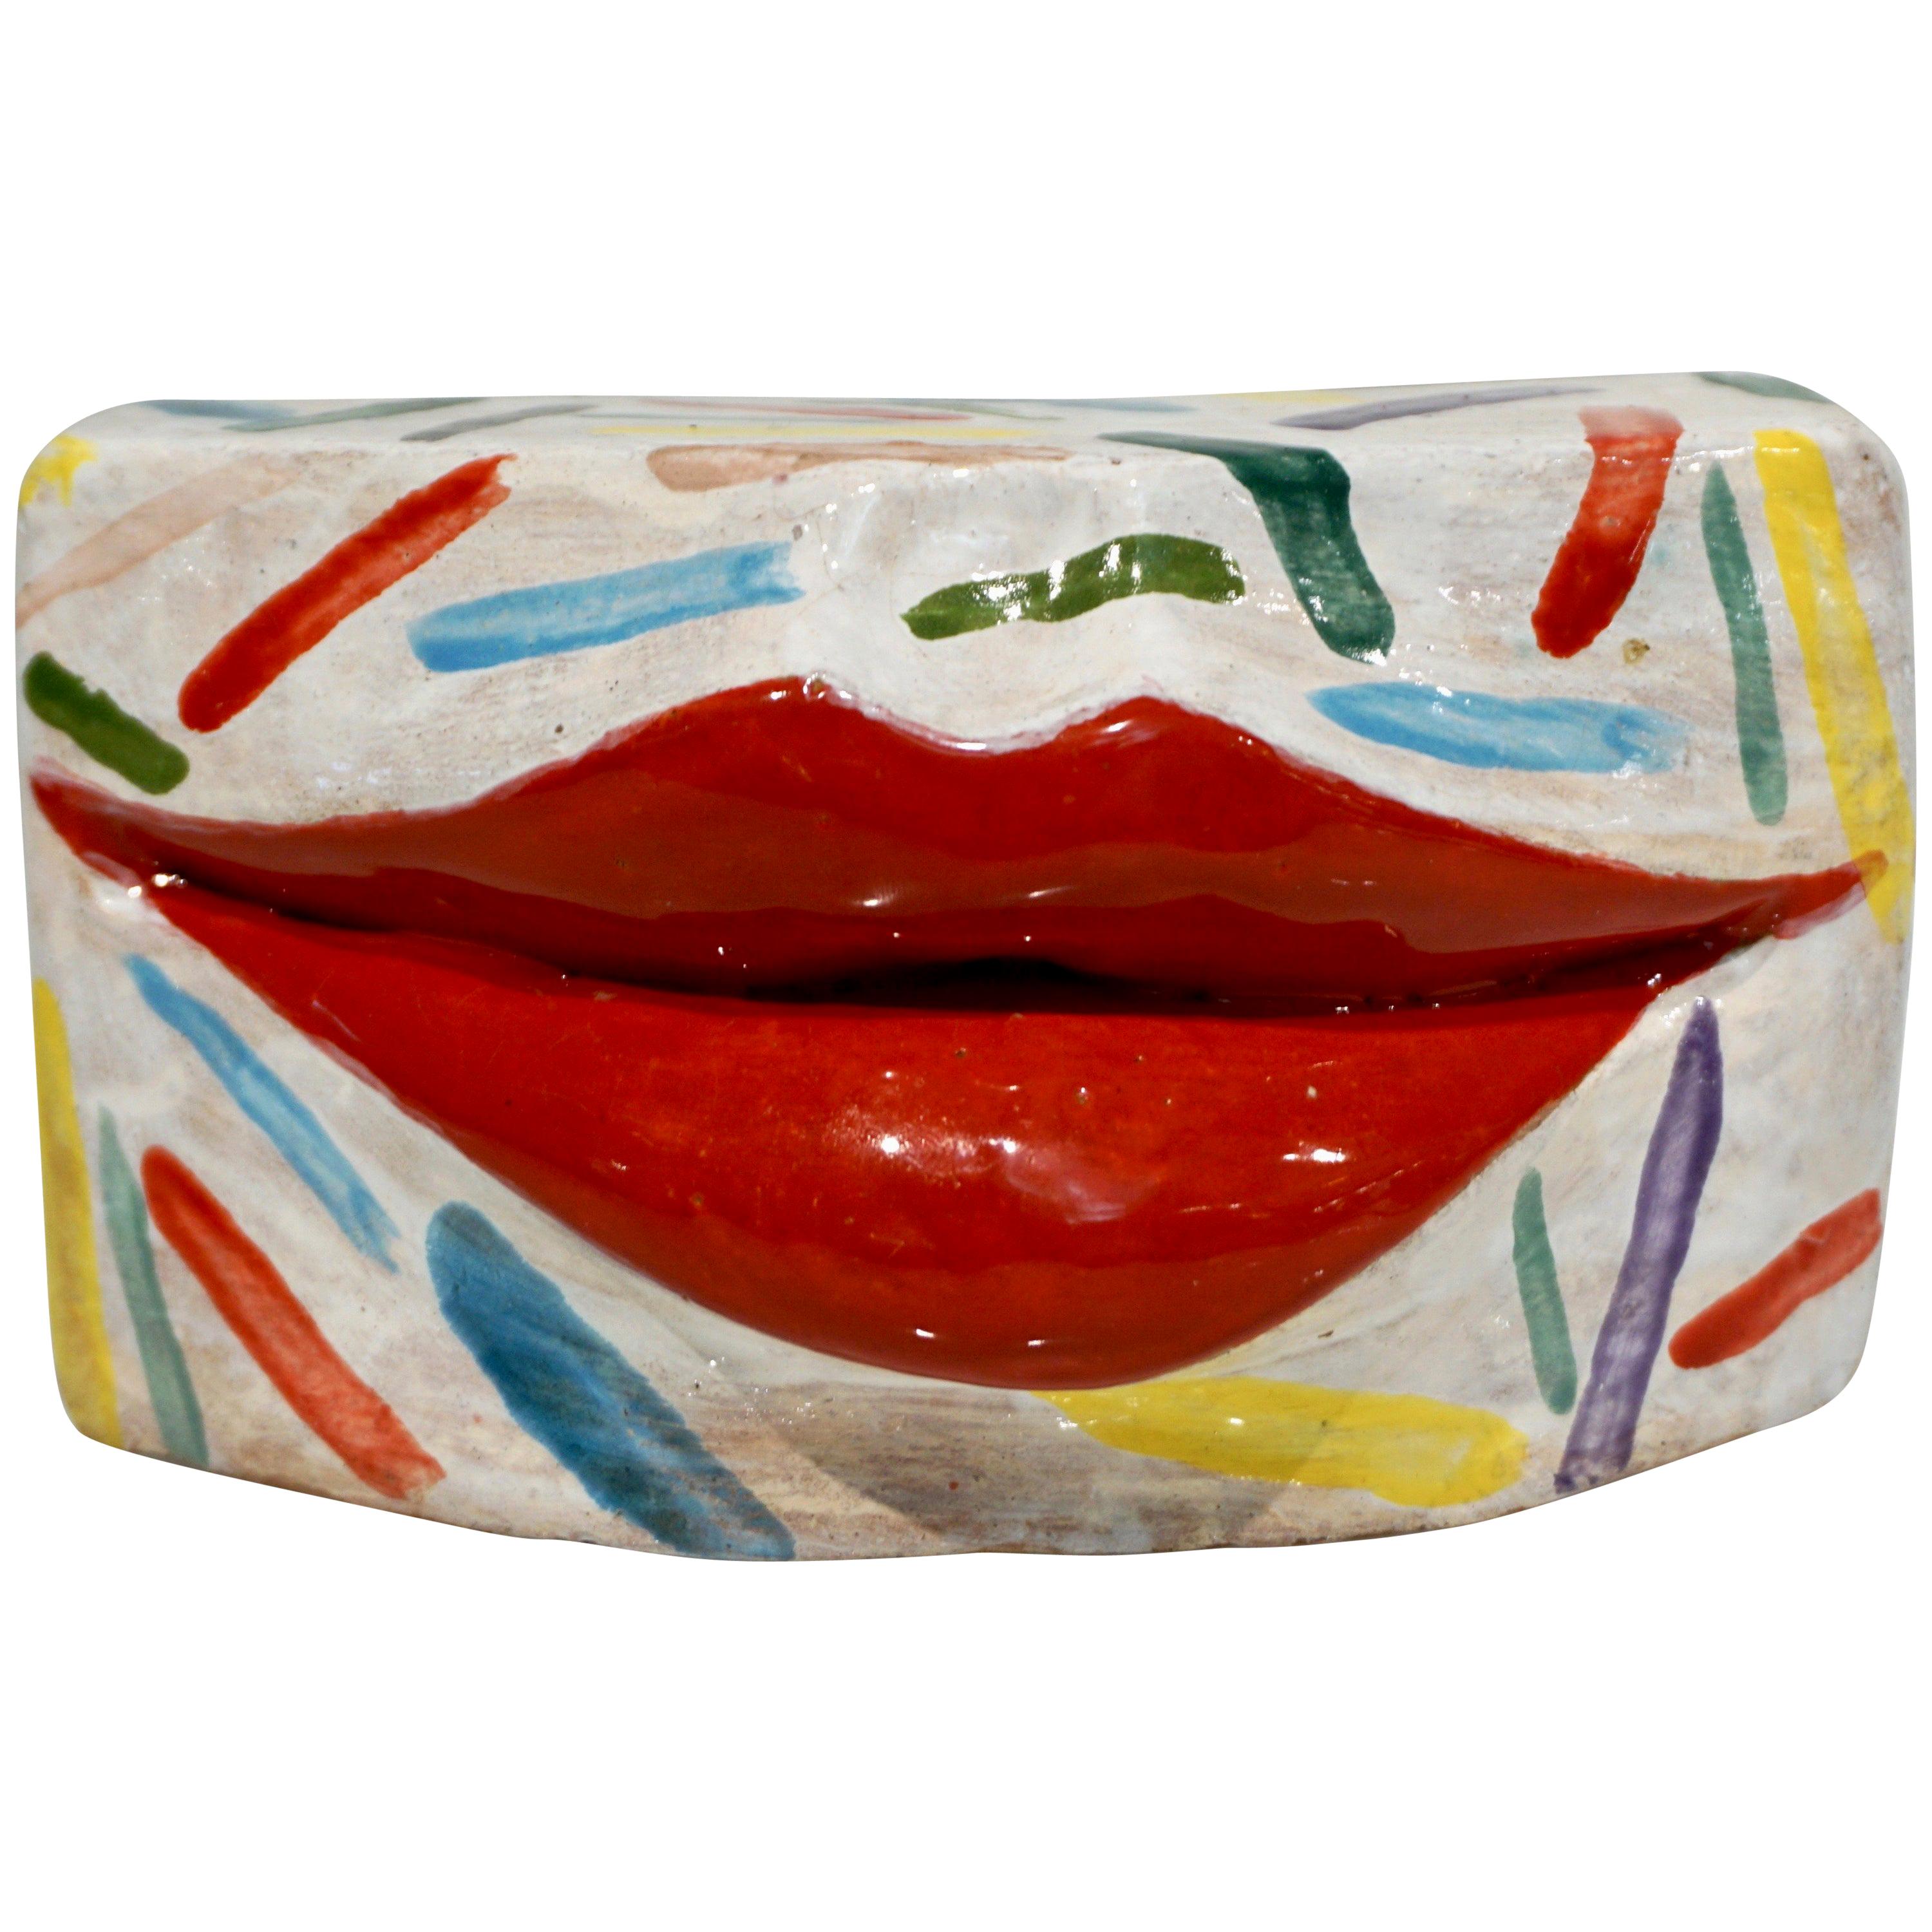 Kiss, Italian Enameled Terracotta Sculpture by Ginestroni with Lipstick Red Lips